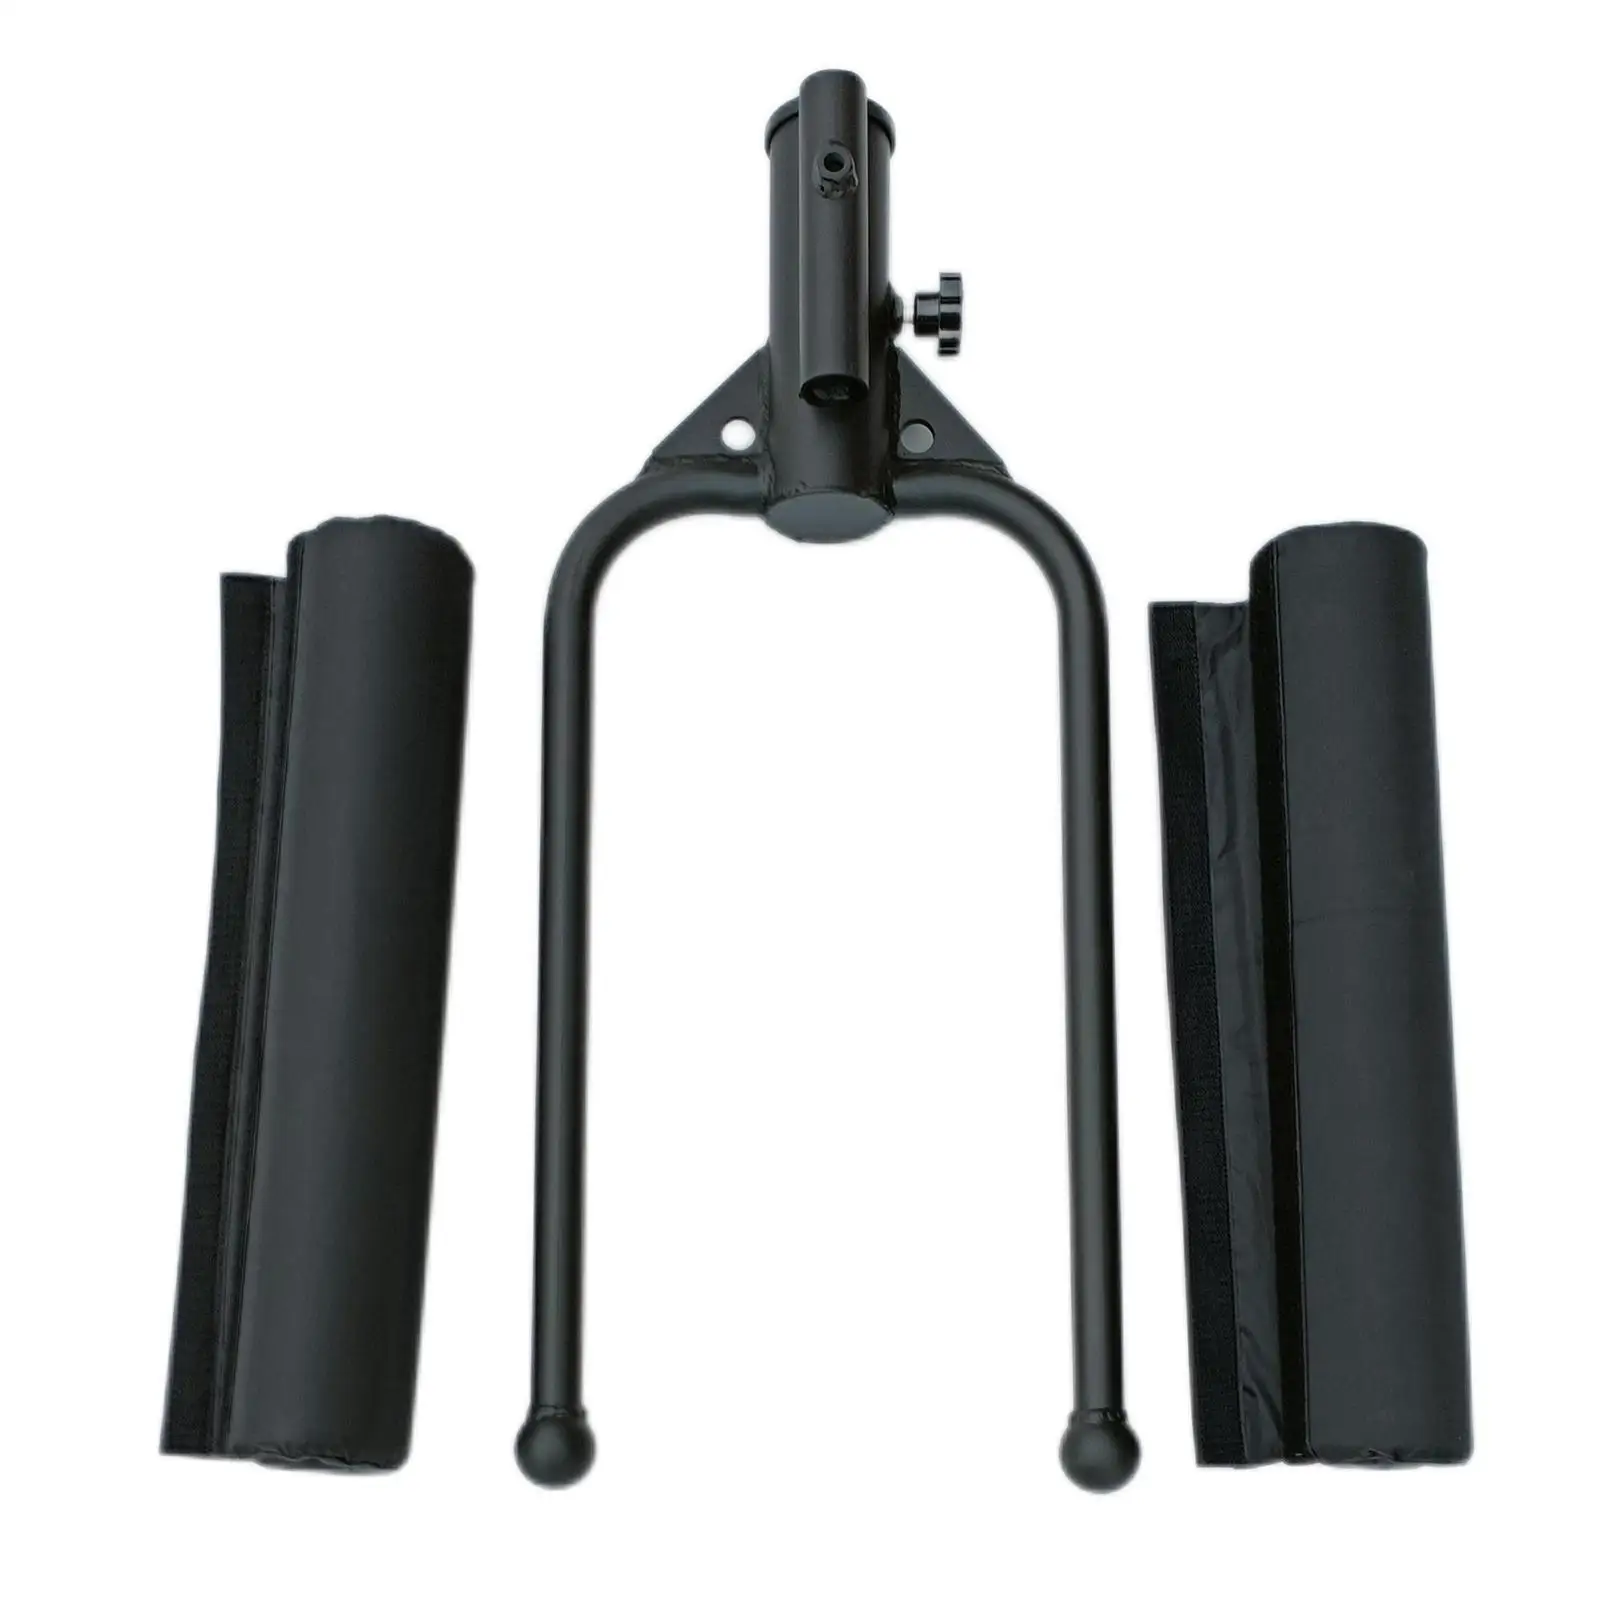 T Bars Row Attachment Bar Row Platform for Barbell Shoulders